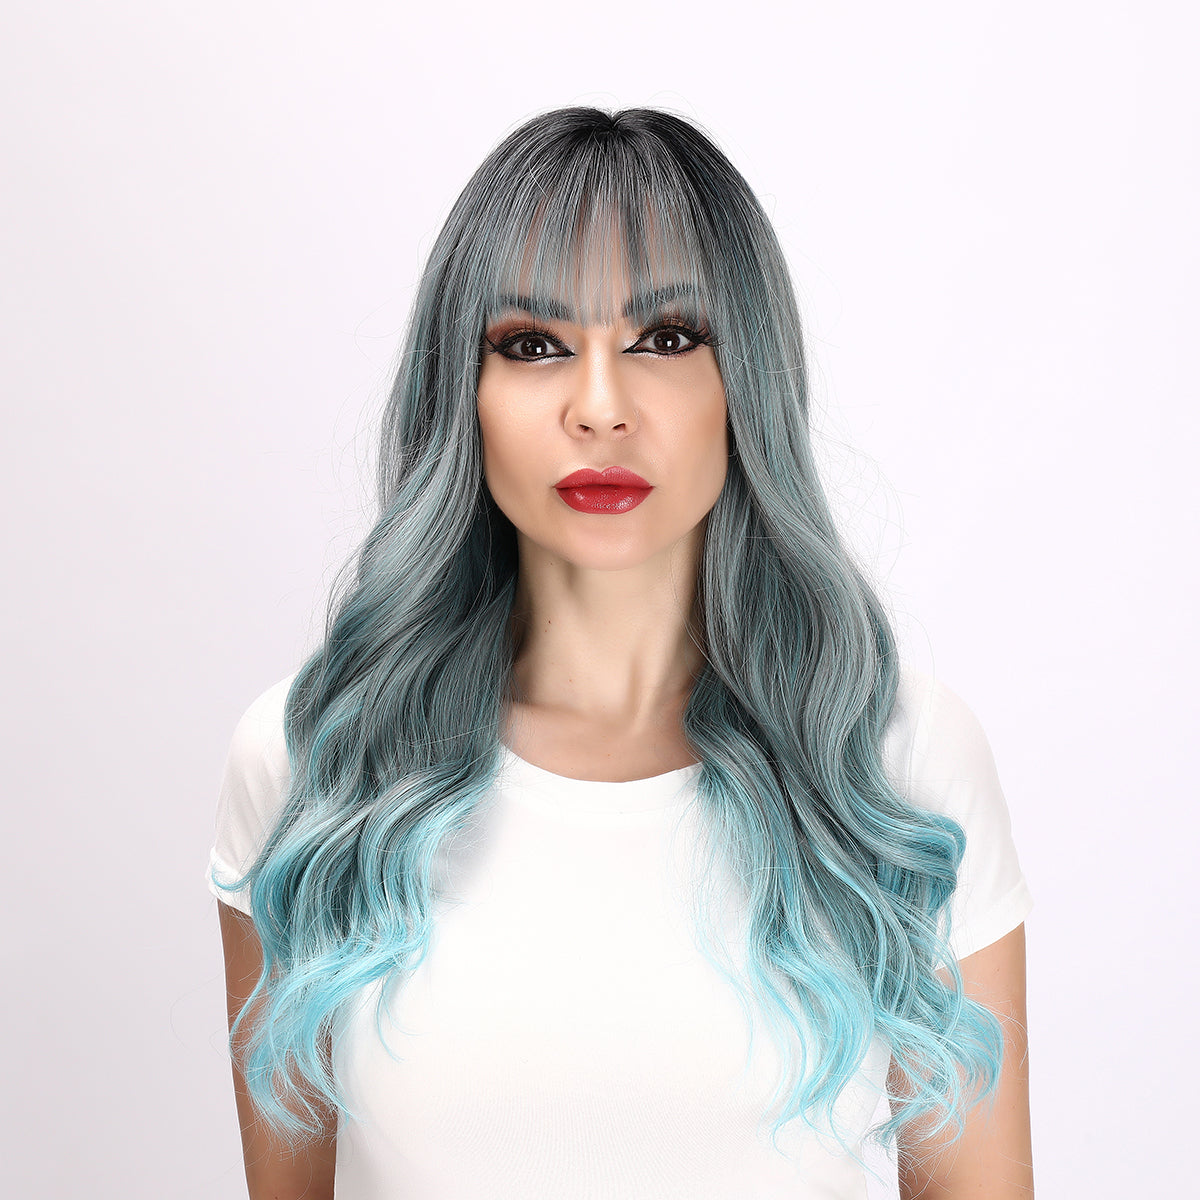 28 Inches | Omber Blue| Costume | Curly Hair